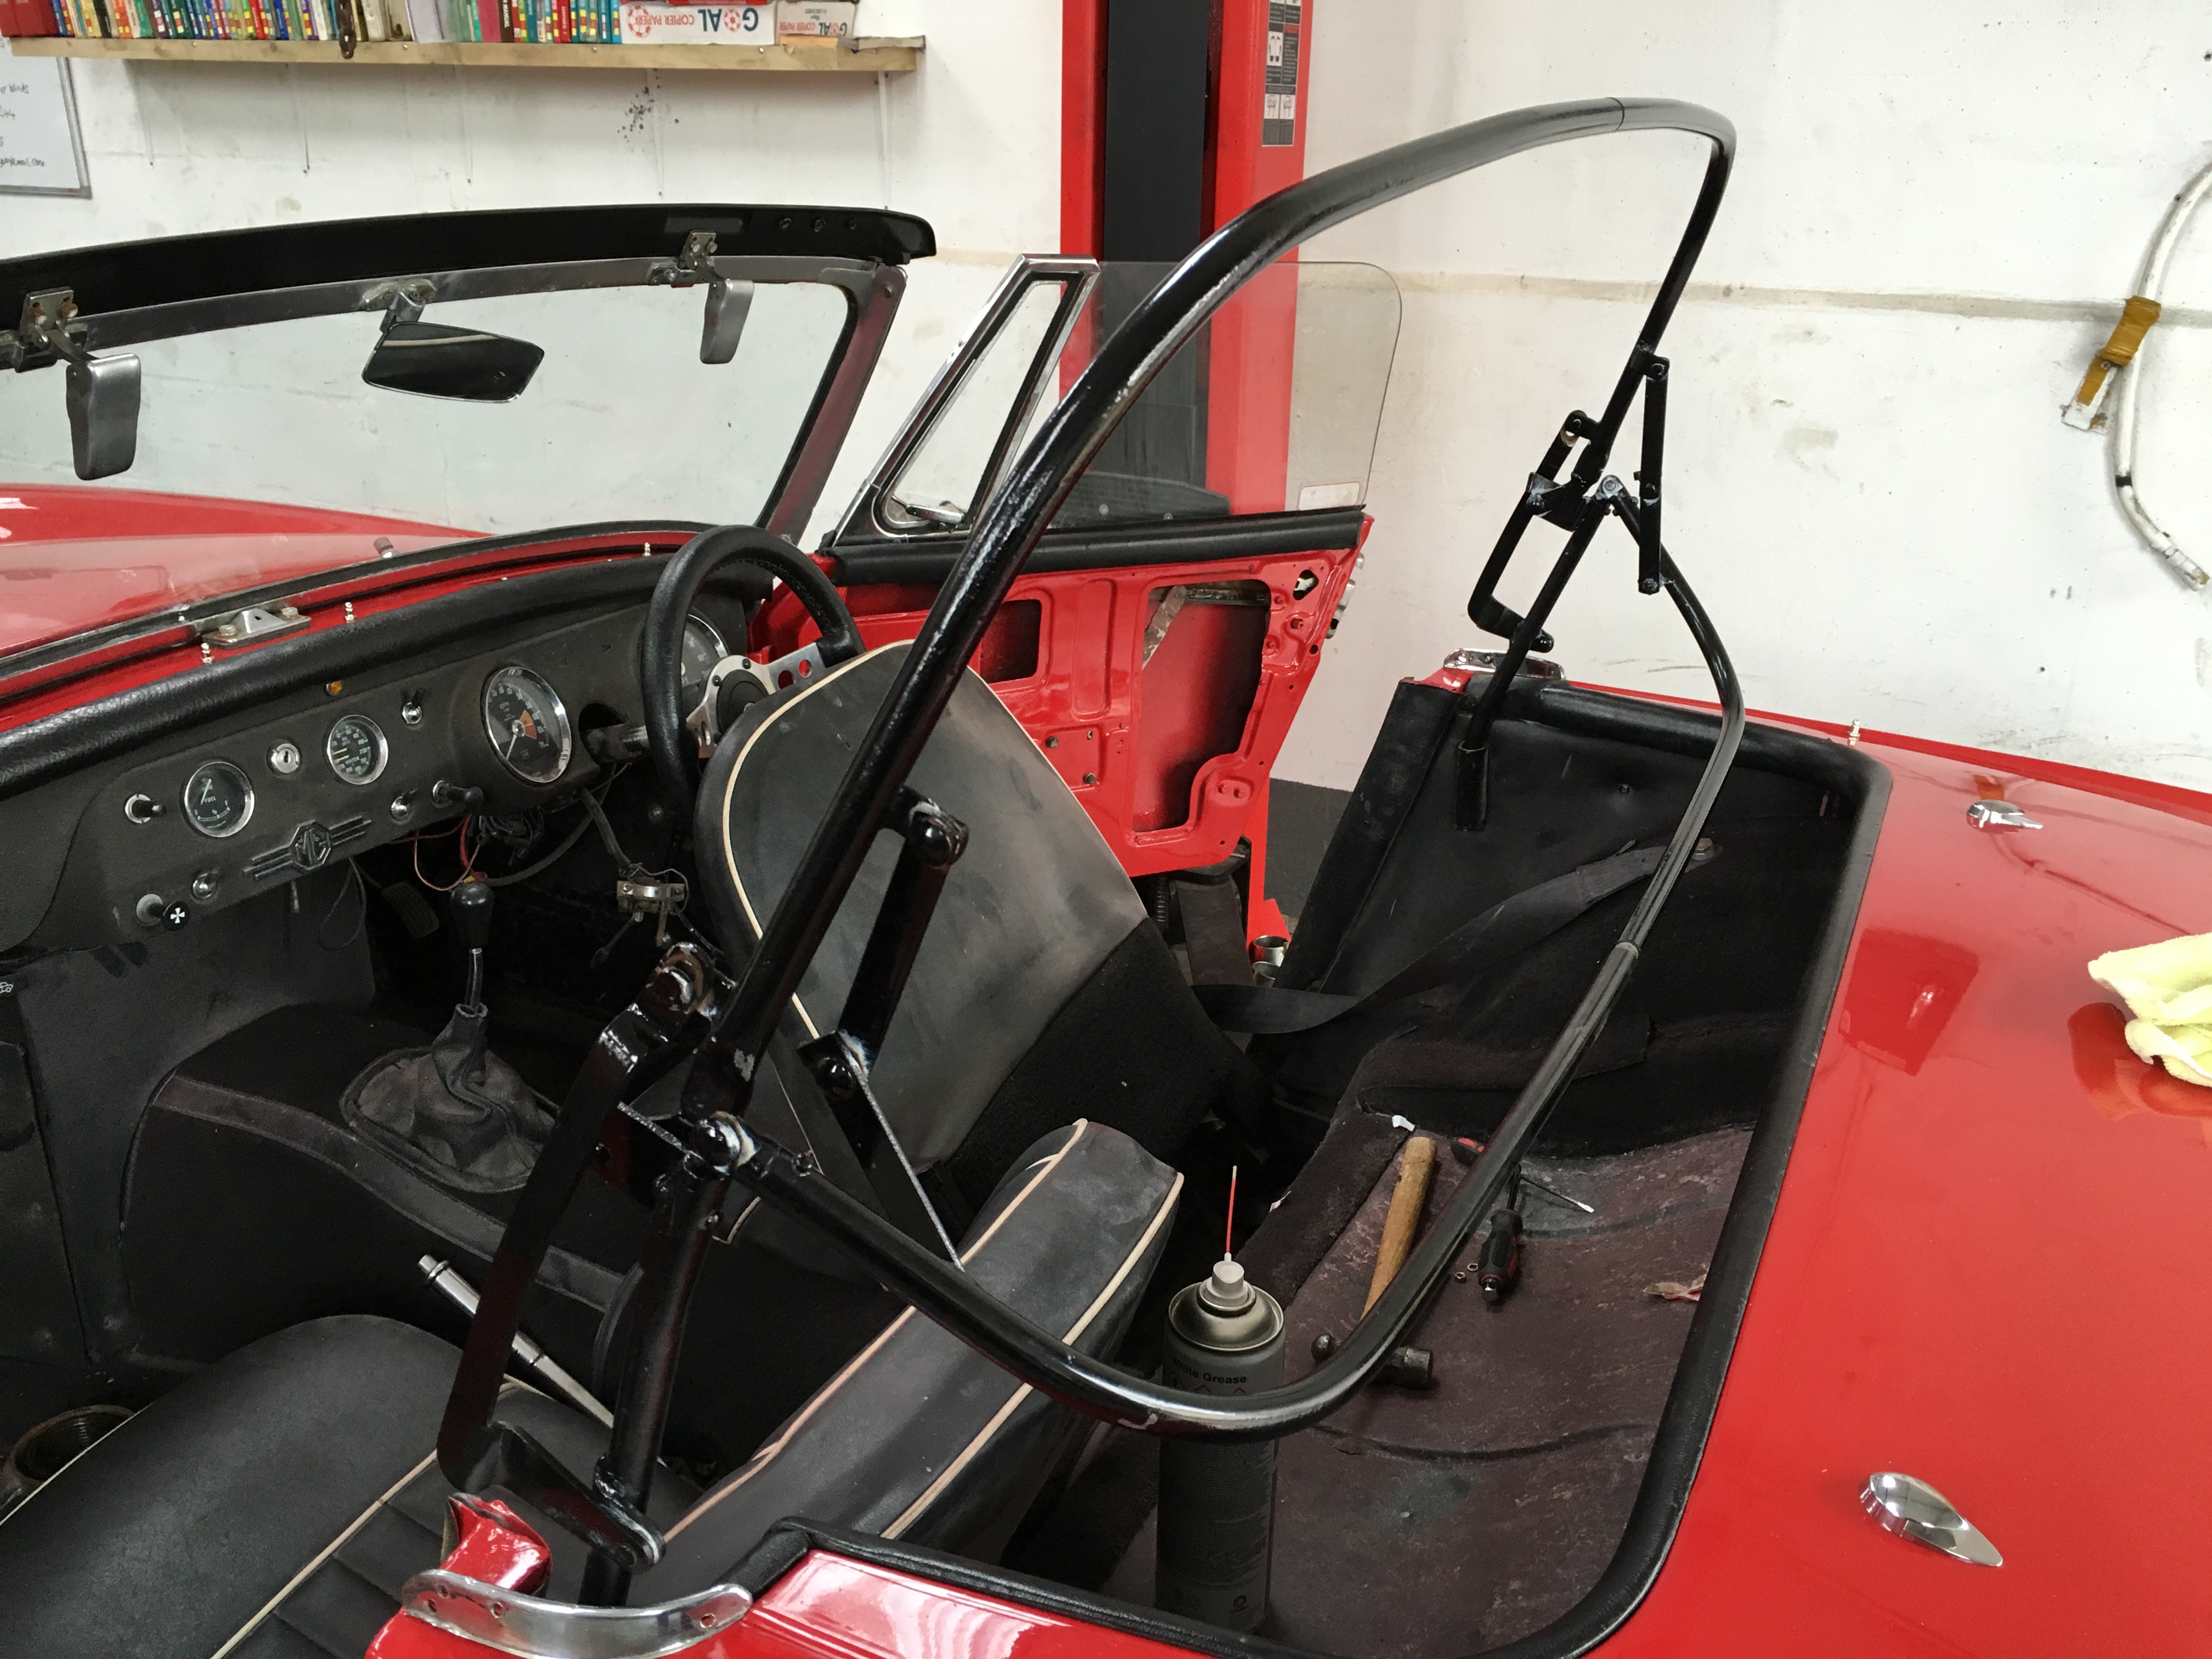 1966 MG Midget - Fitting the roof